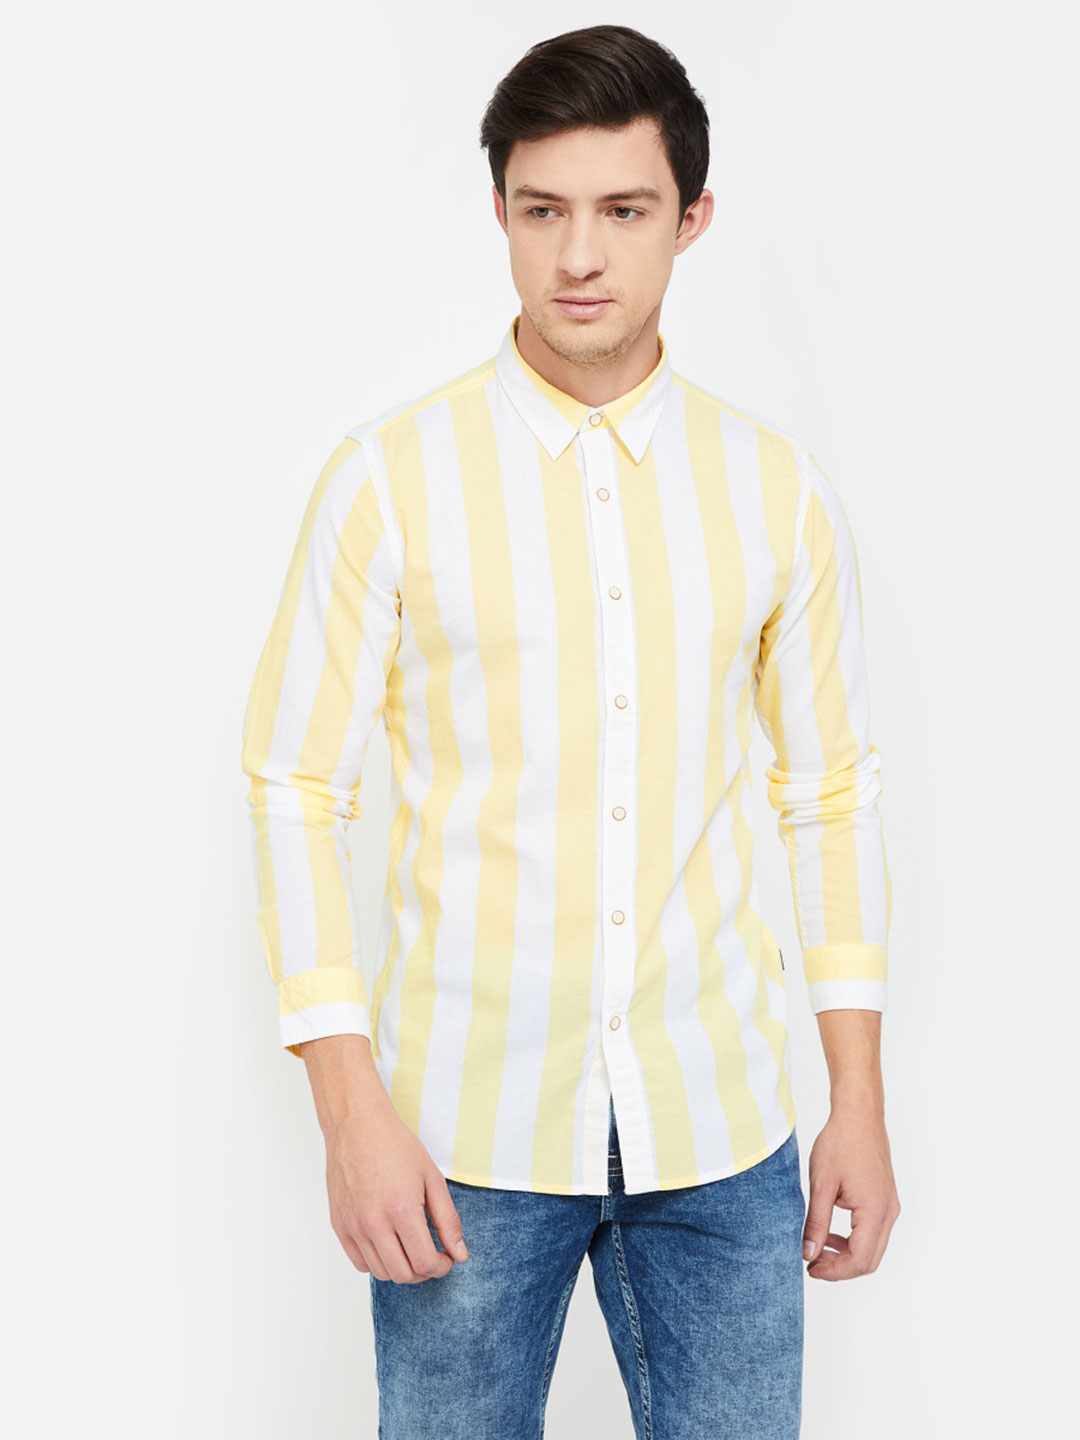 yellow and white striped top